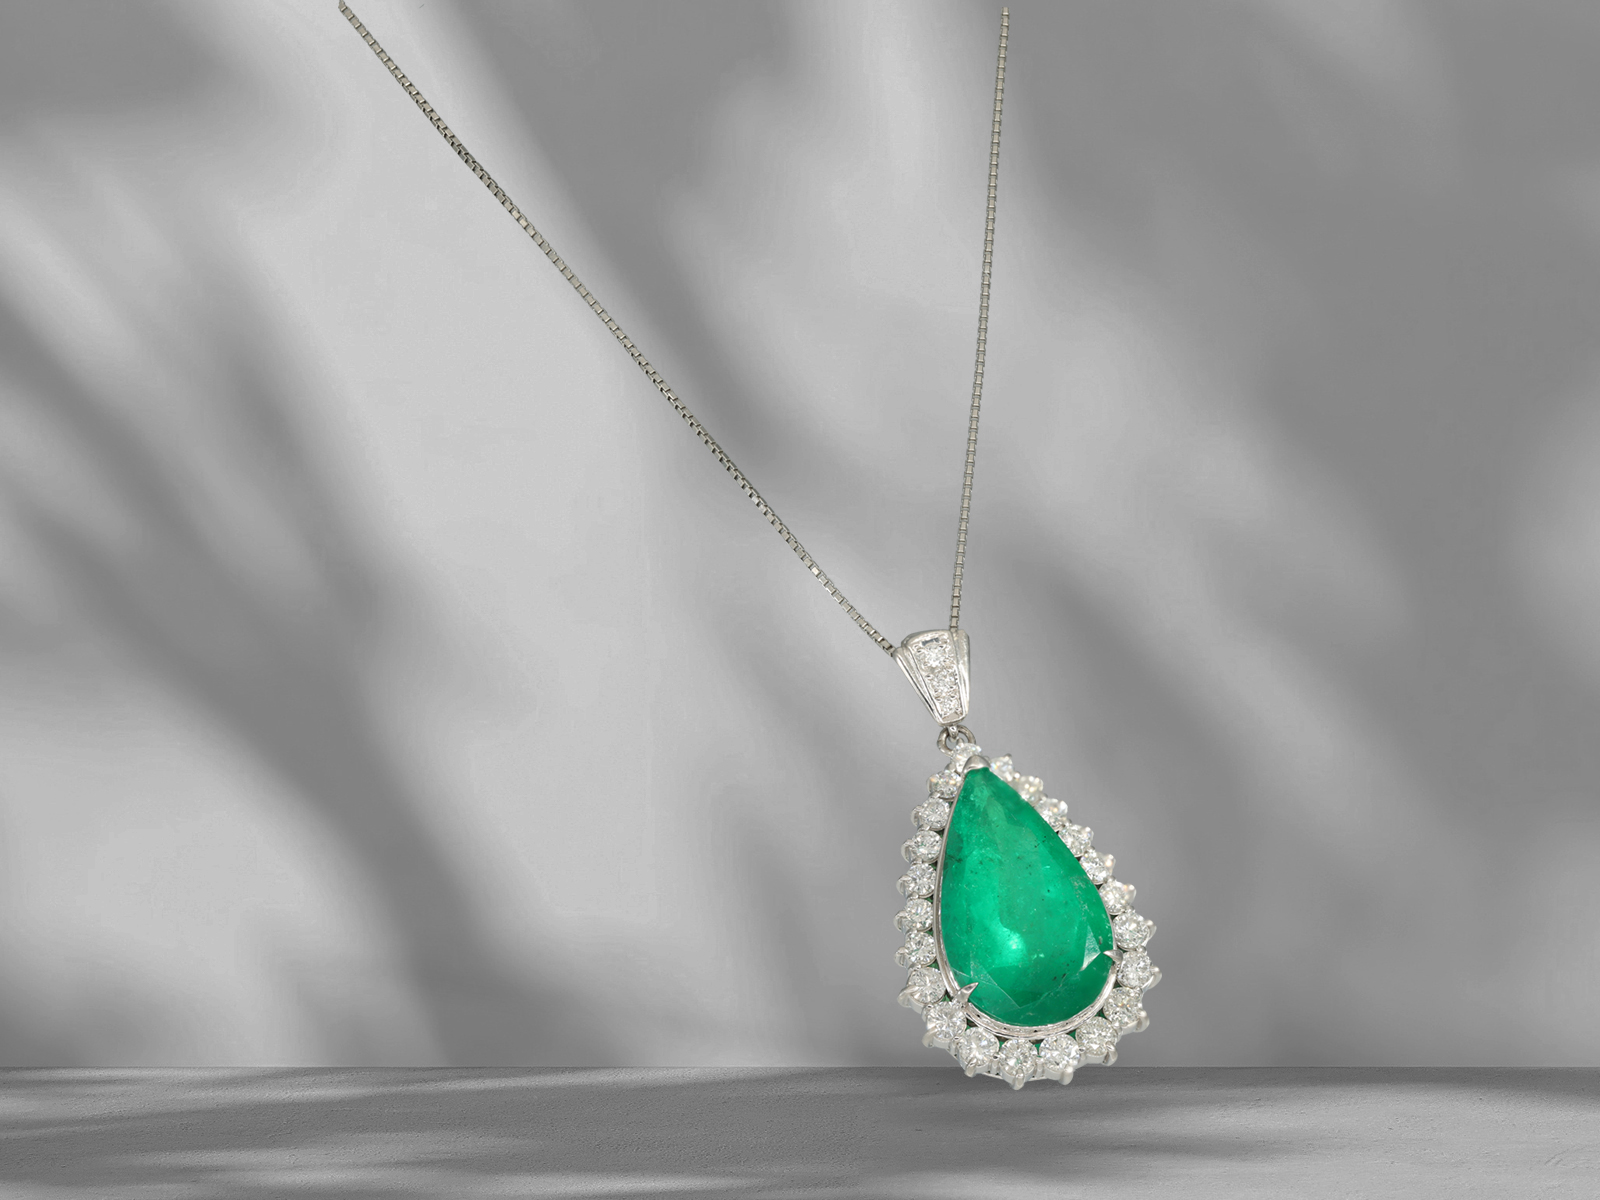 Chain/necklace with precious emerald pendant, platinum, 7.73ct, like new - Image 4 of 4